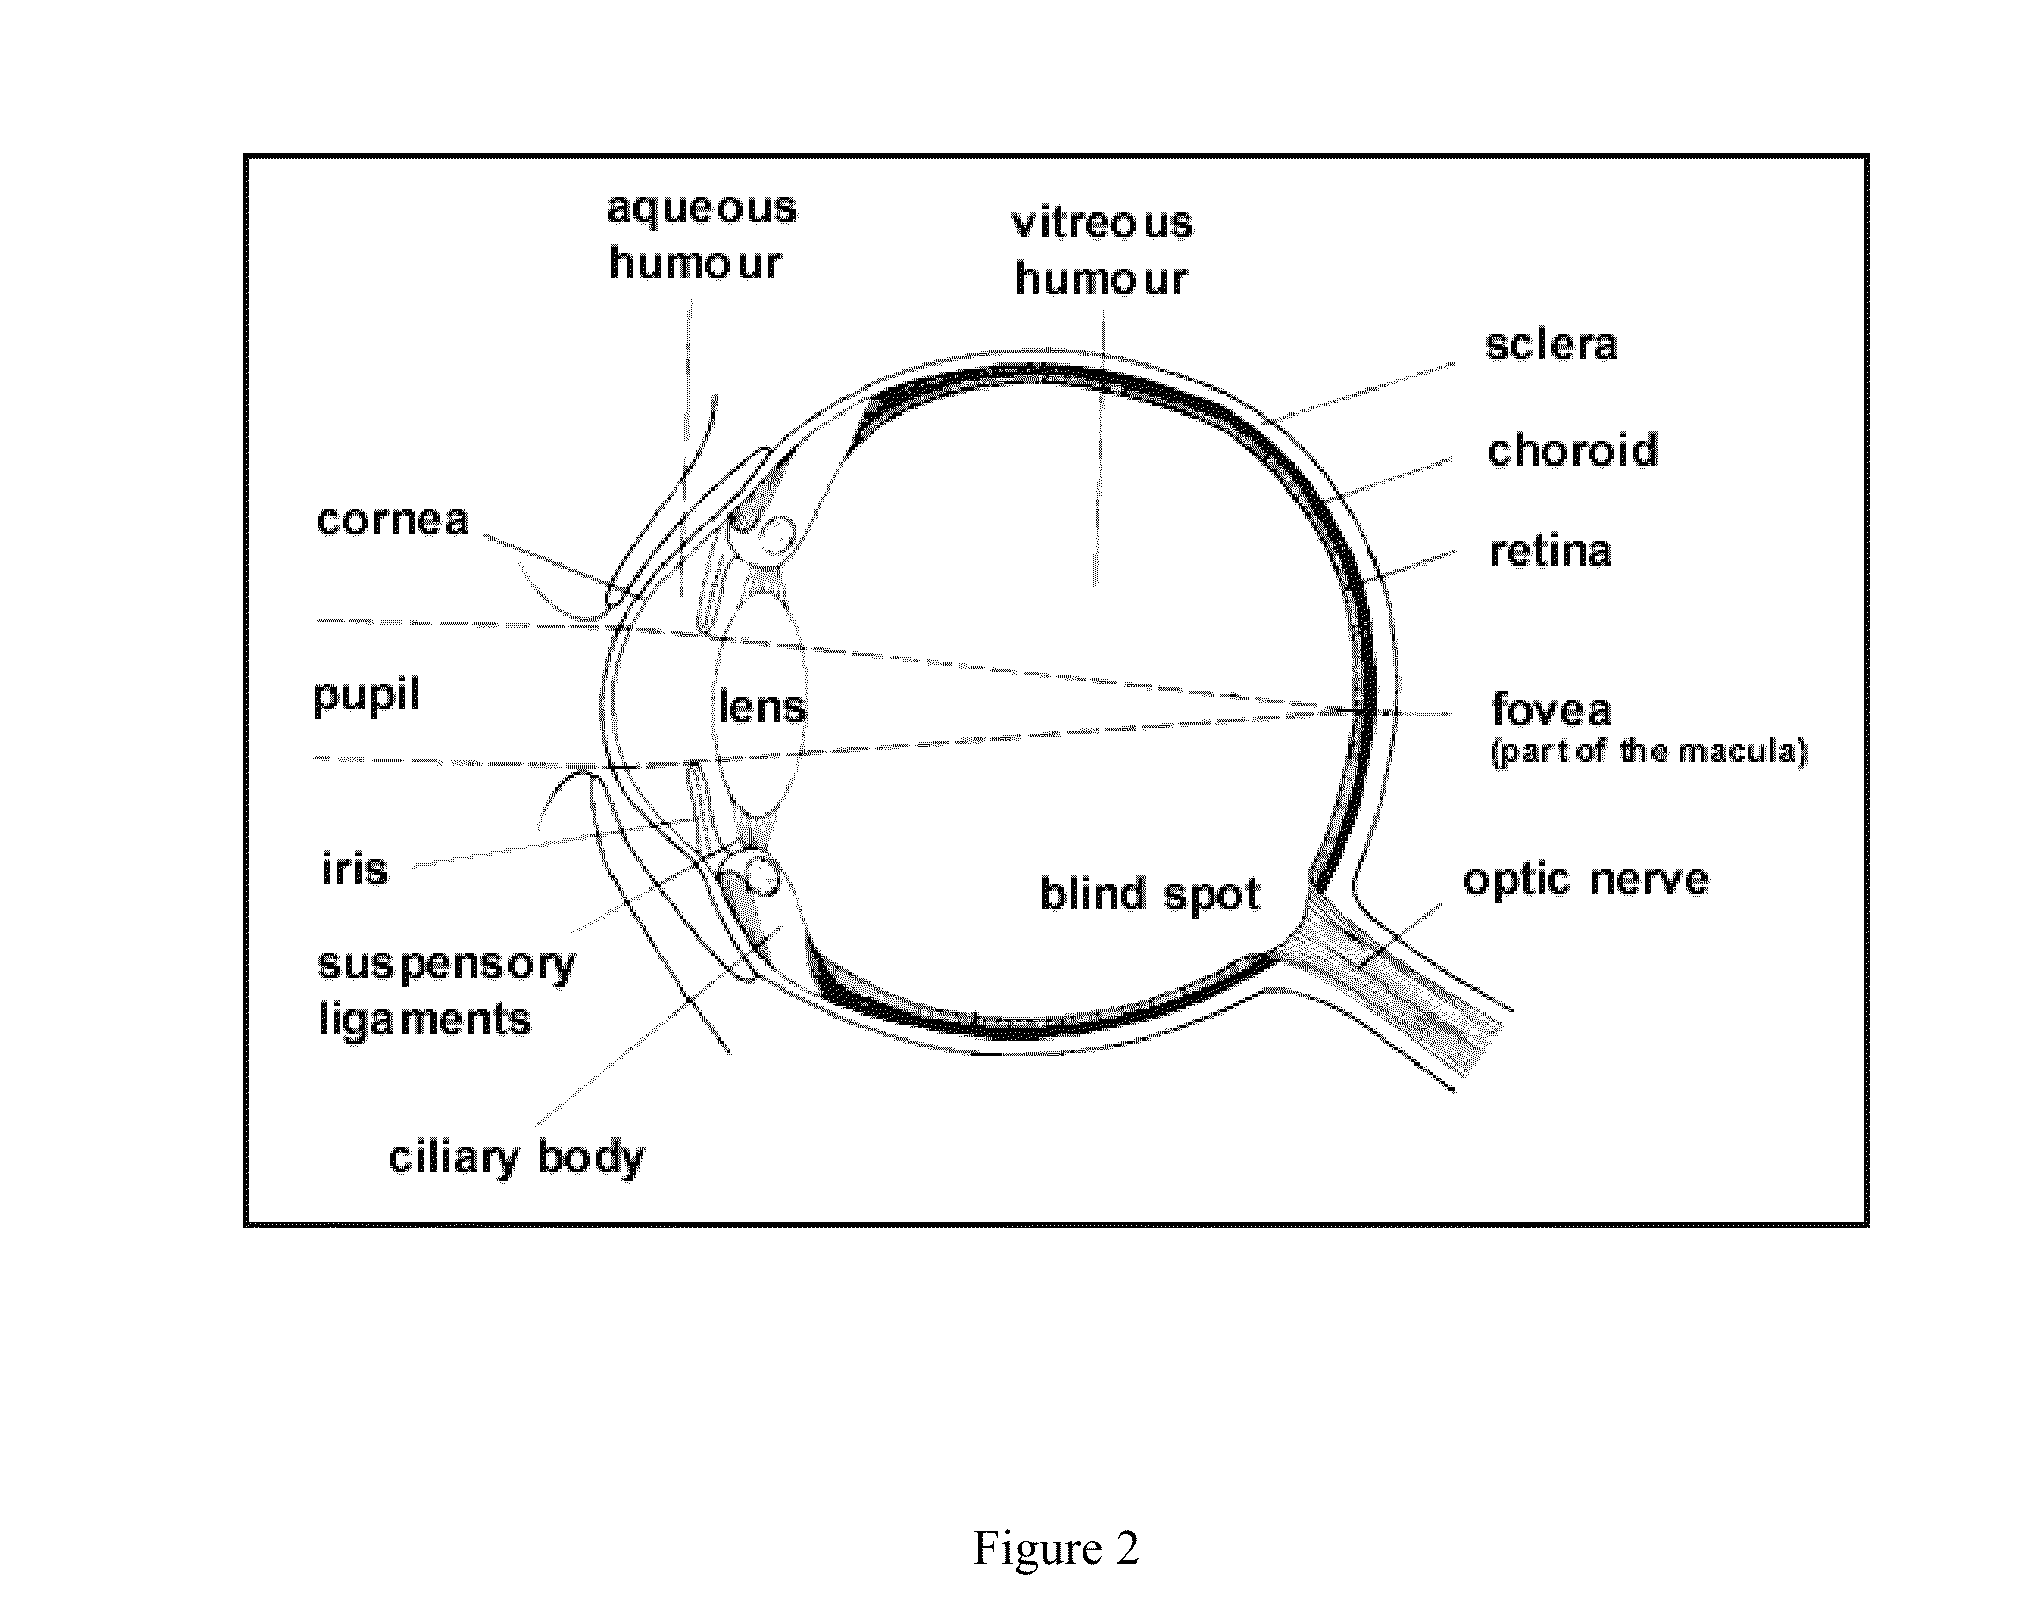 Methods of treating outer eye disorders using high ORP acid water and compositions thereof